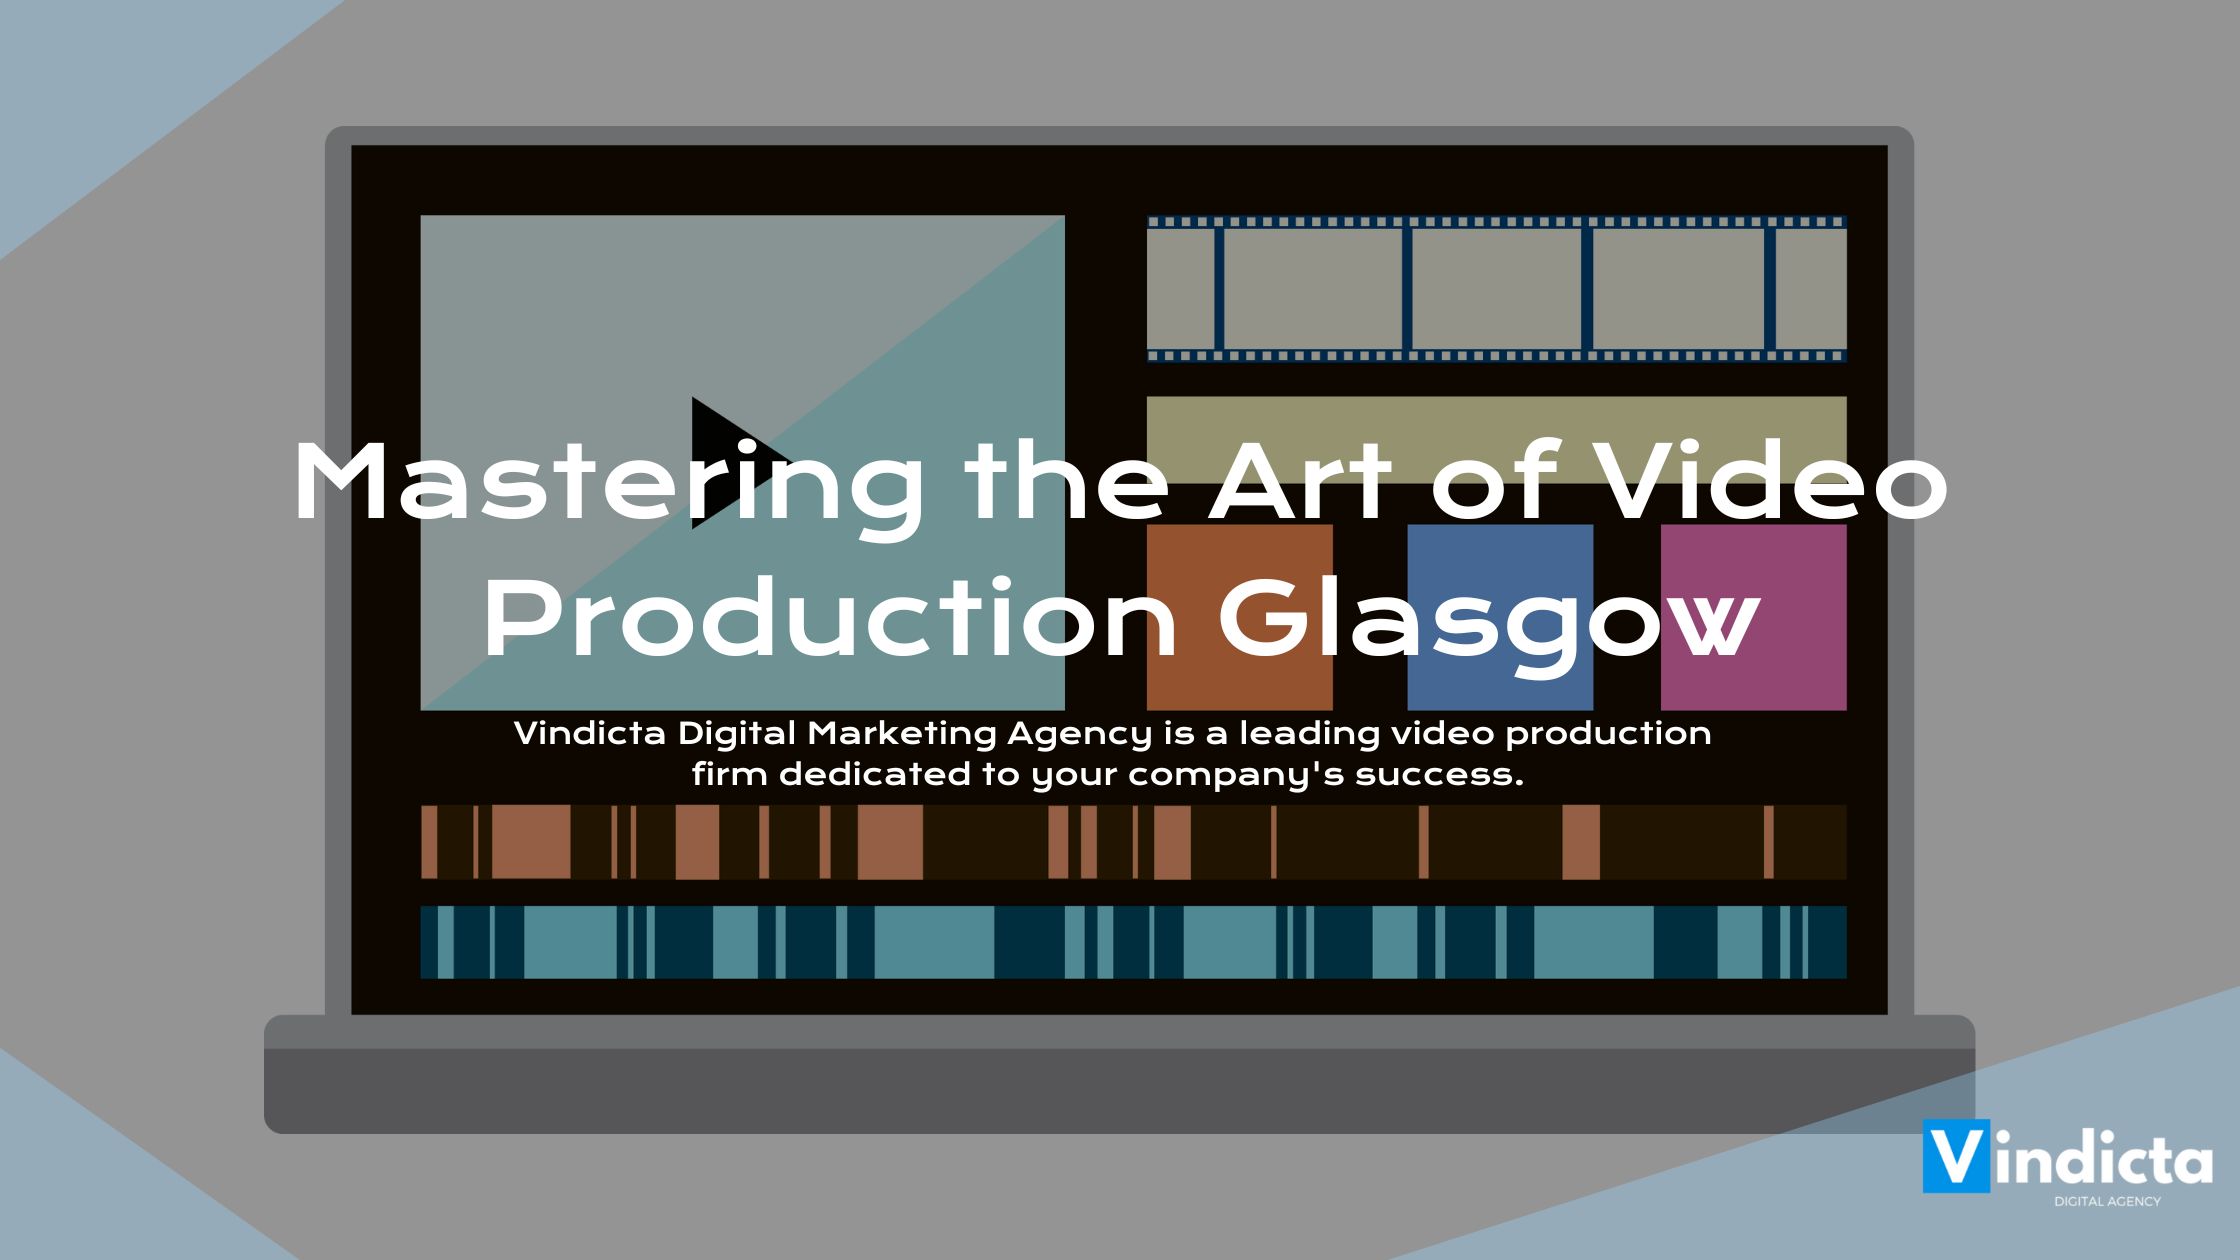 Mastering the Art of Video Production Glasgow